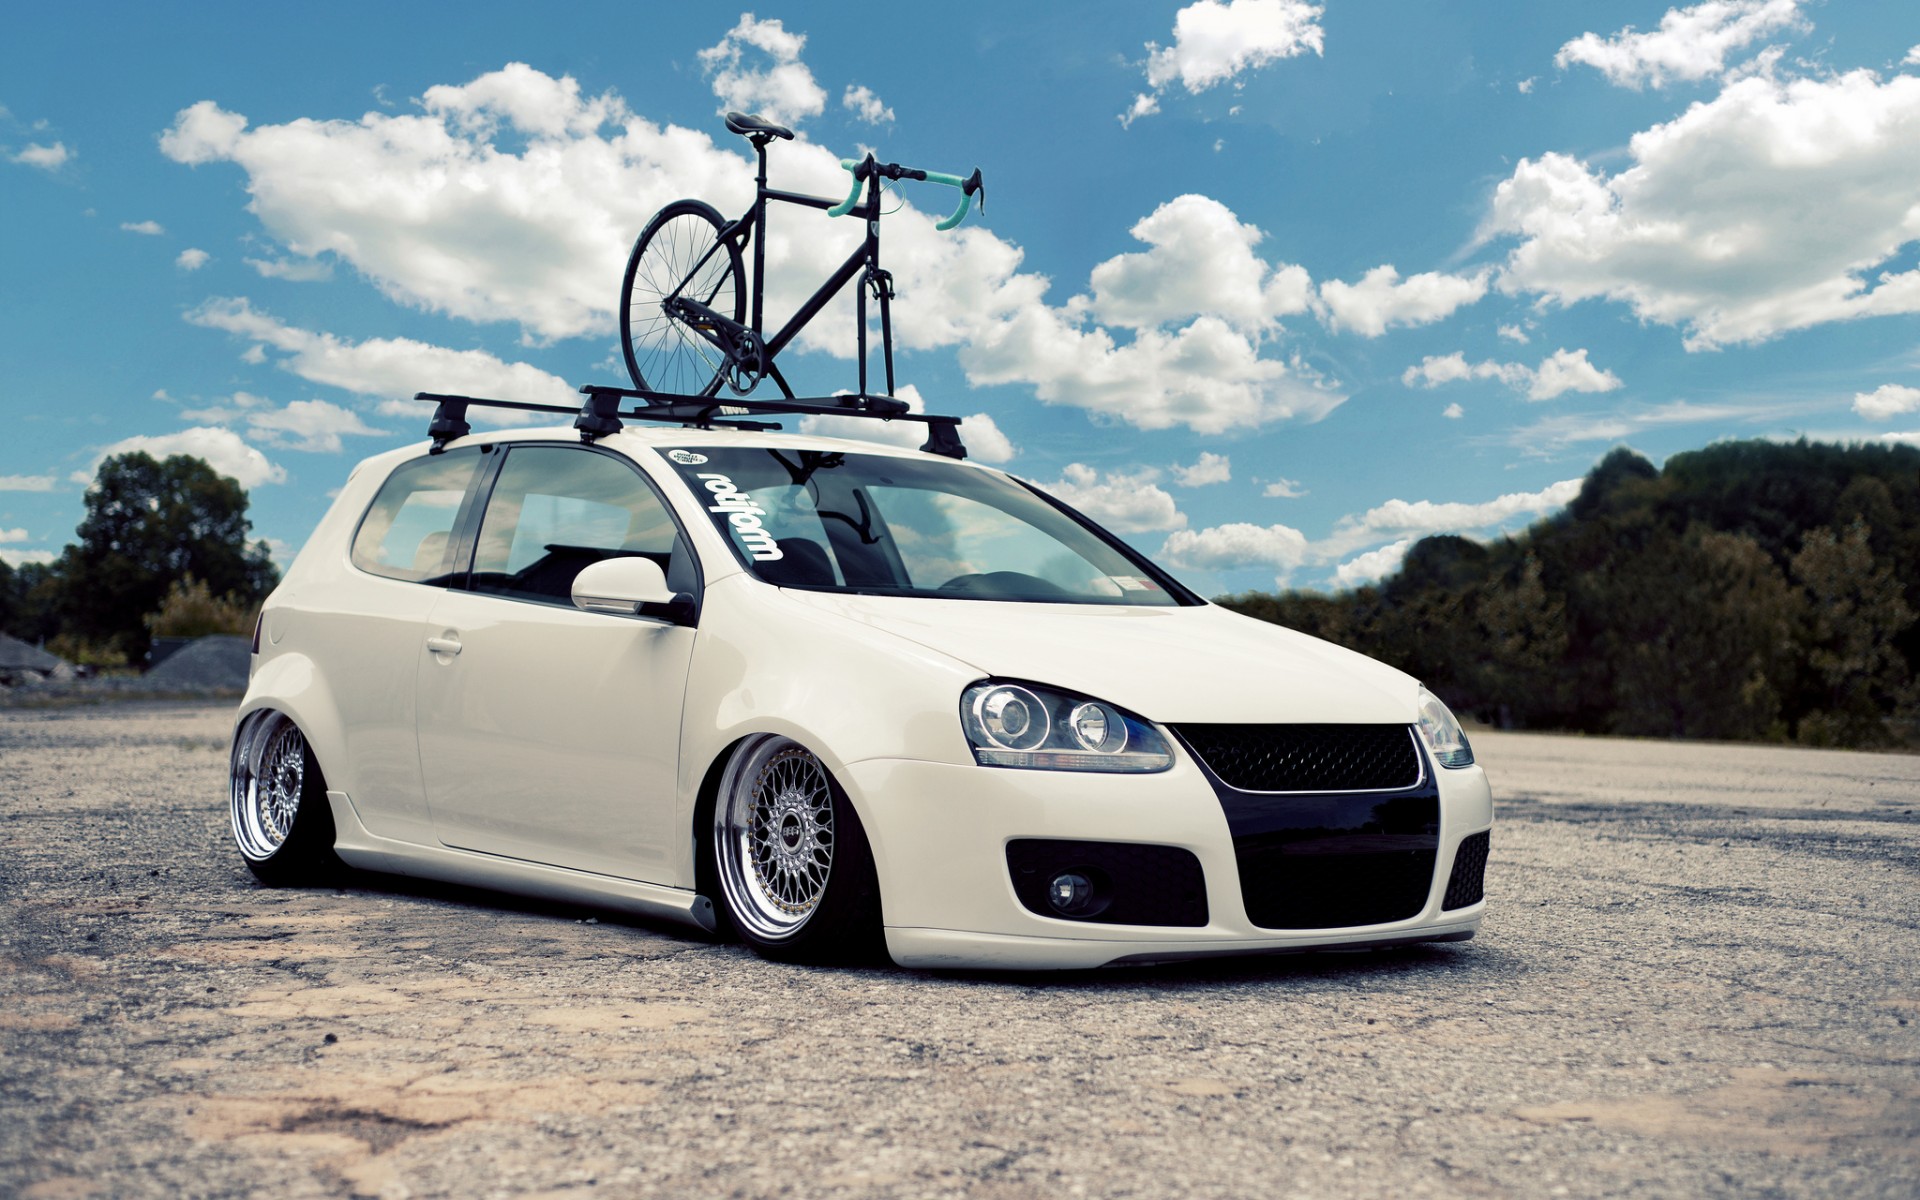 volkswagen, Golf, Vehicles, Cars, Auto, Tuning, Stance, Wheels, Bike, Bycycle, Low, Roads, Sky, Clouds Wallpaper